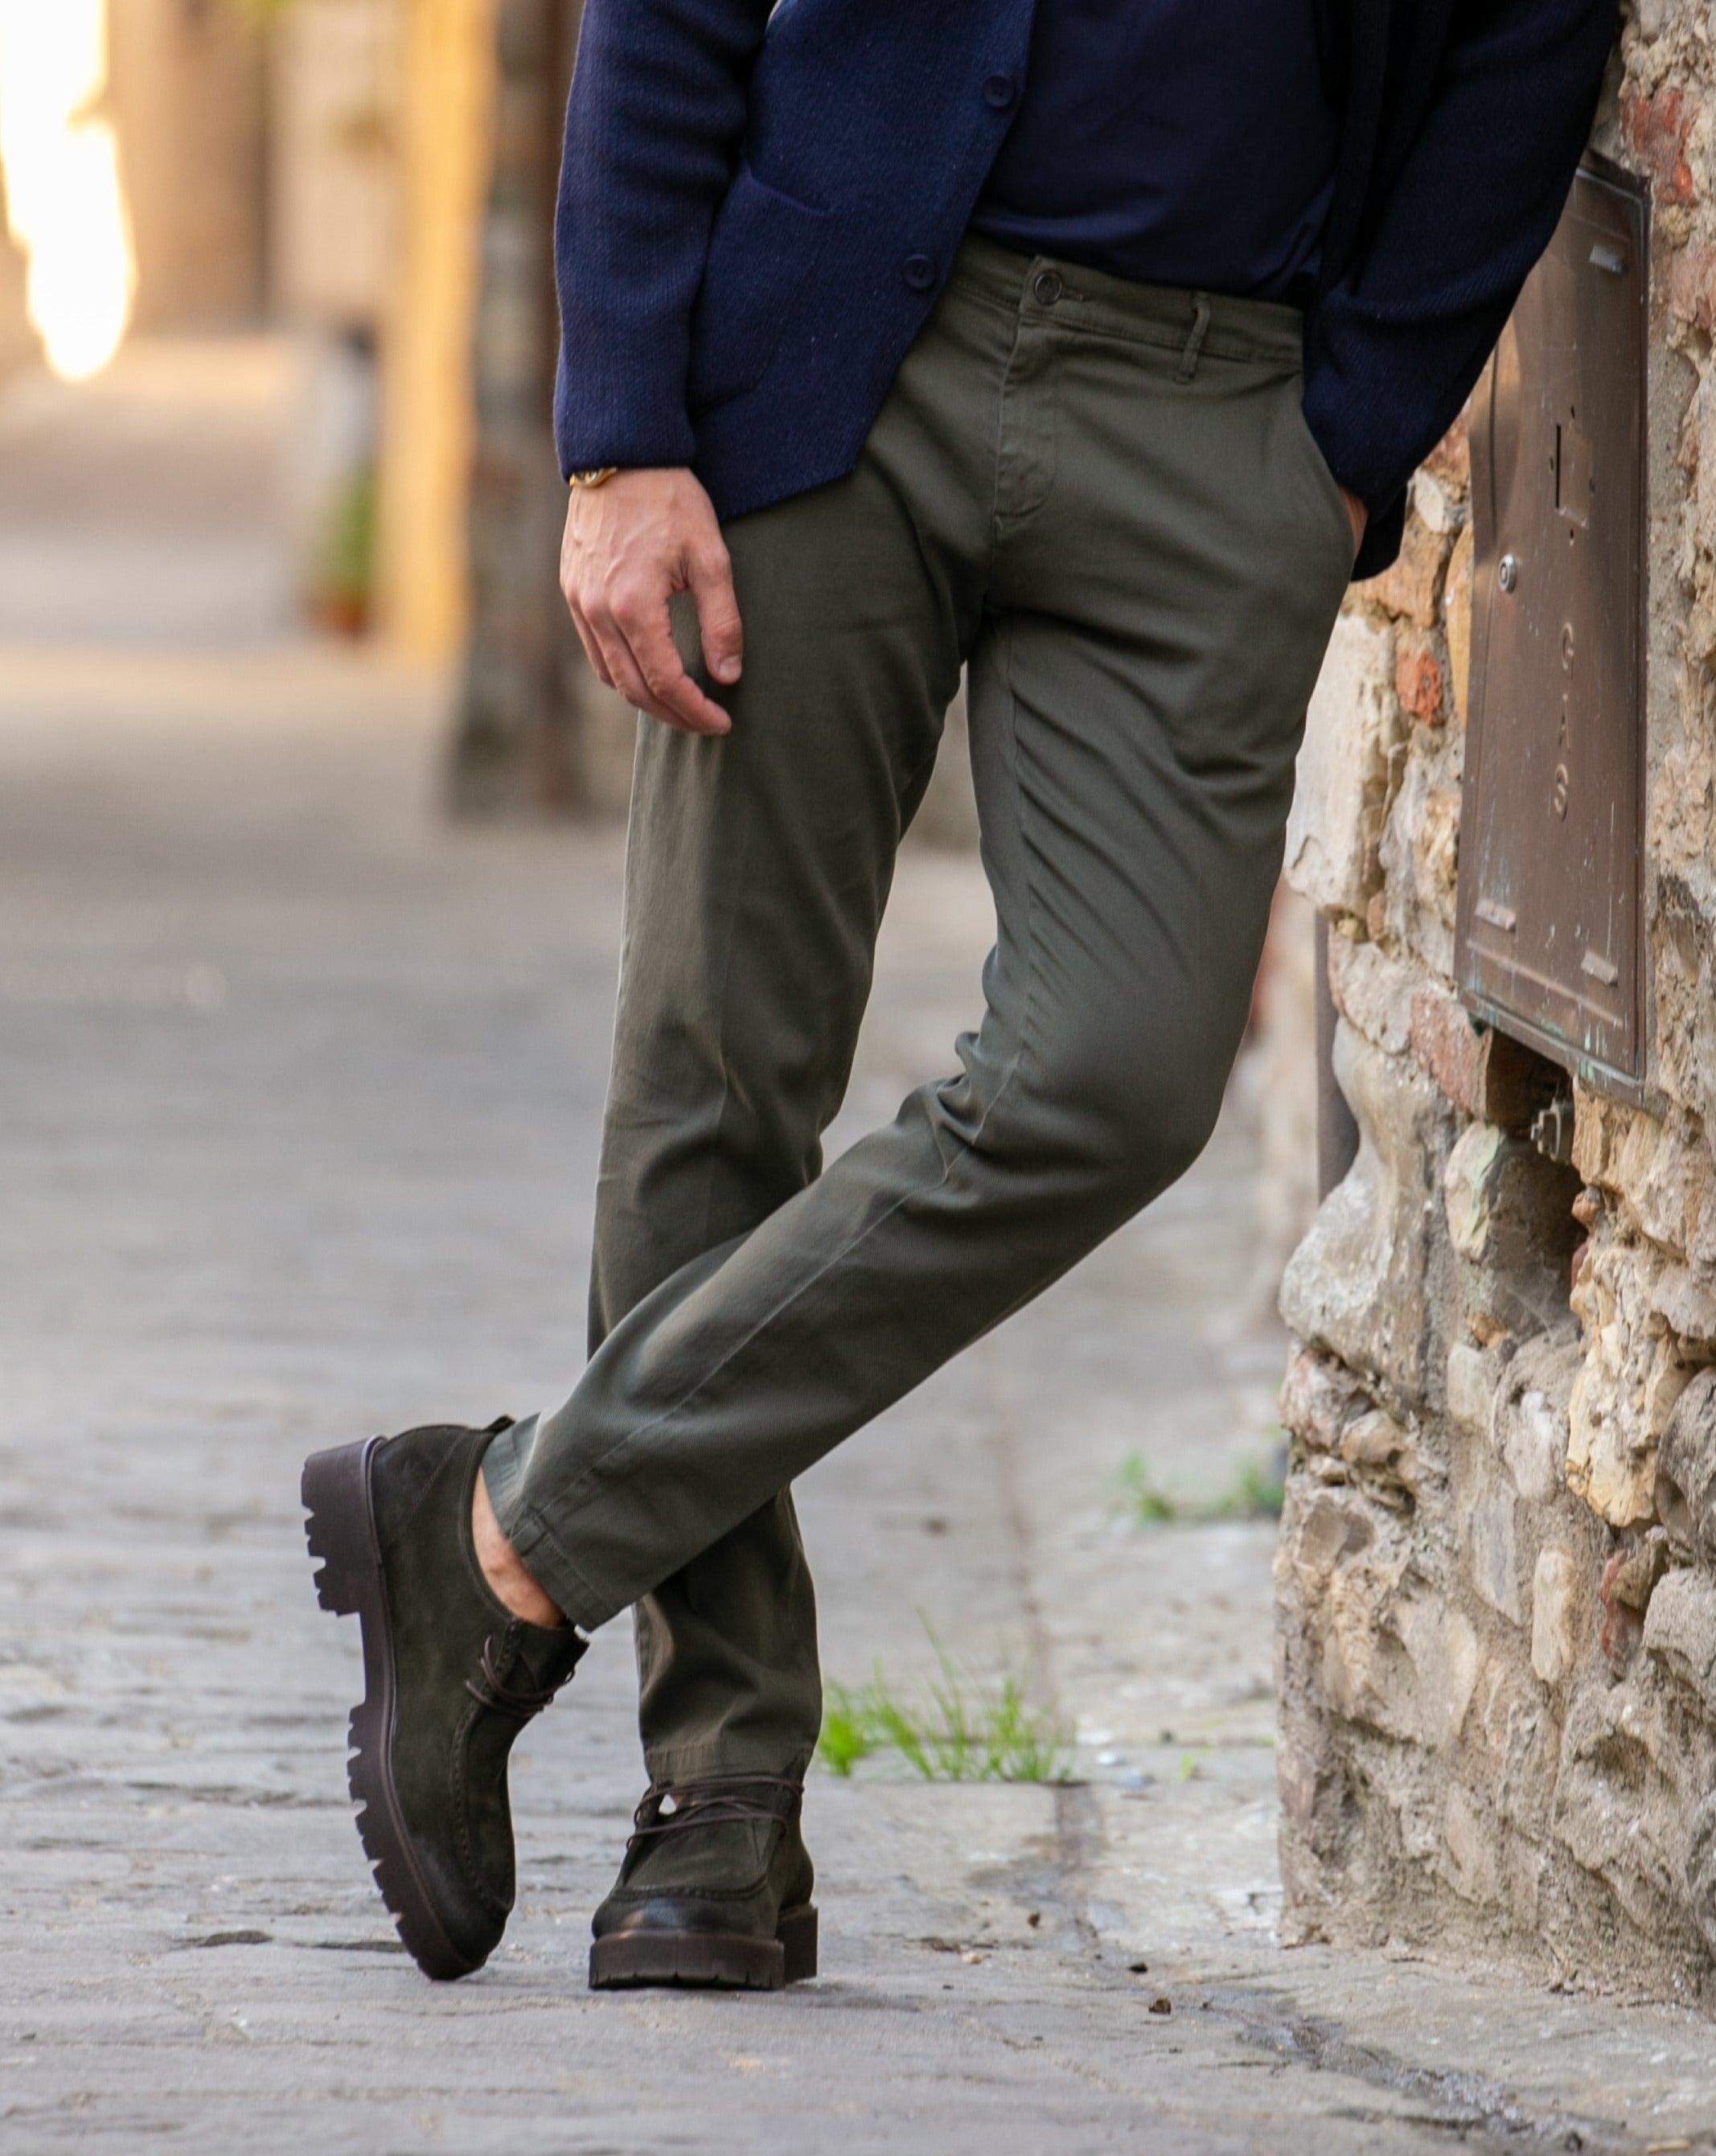 Jack - military armored trousers